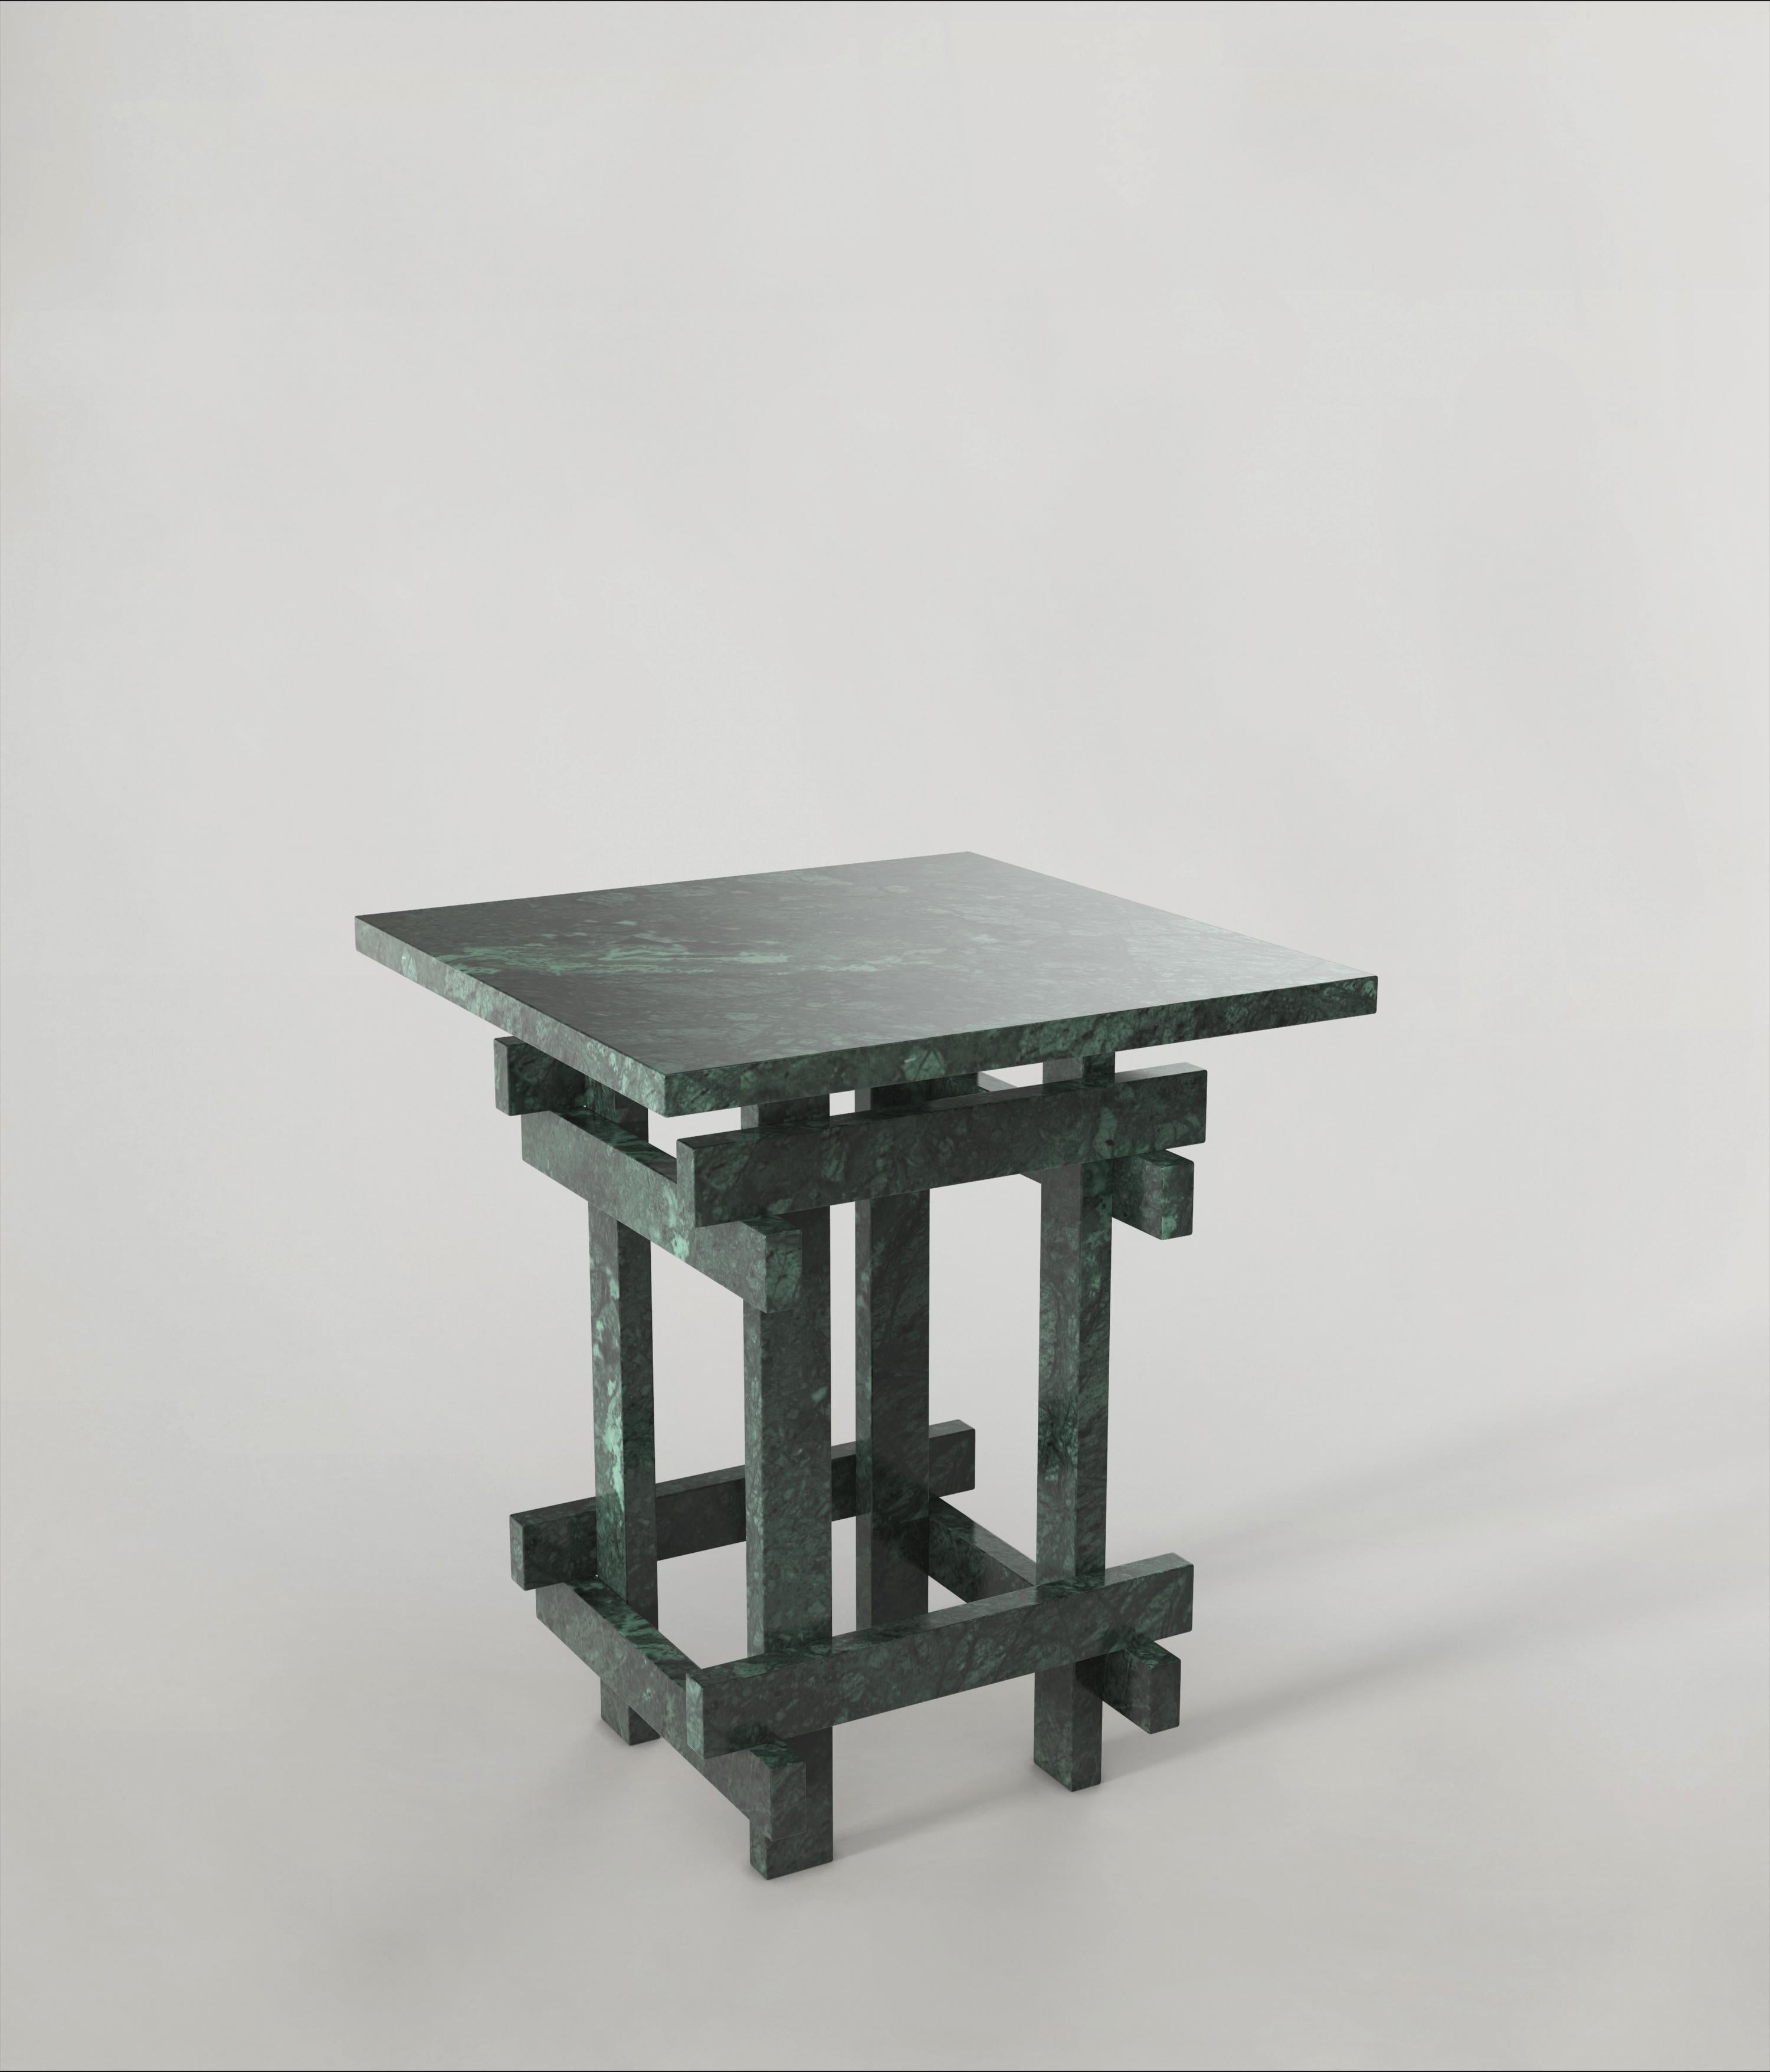 Contemporary LimitedEdition Green Marble Table, Paranoid V1 by Edizione Limitata For Sale 1